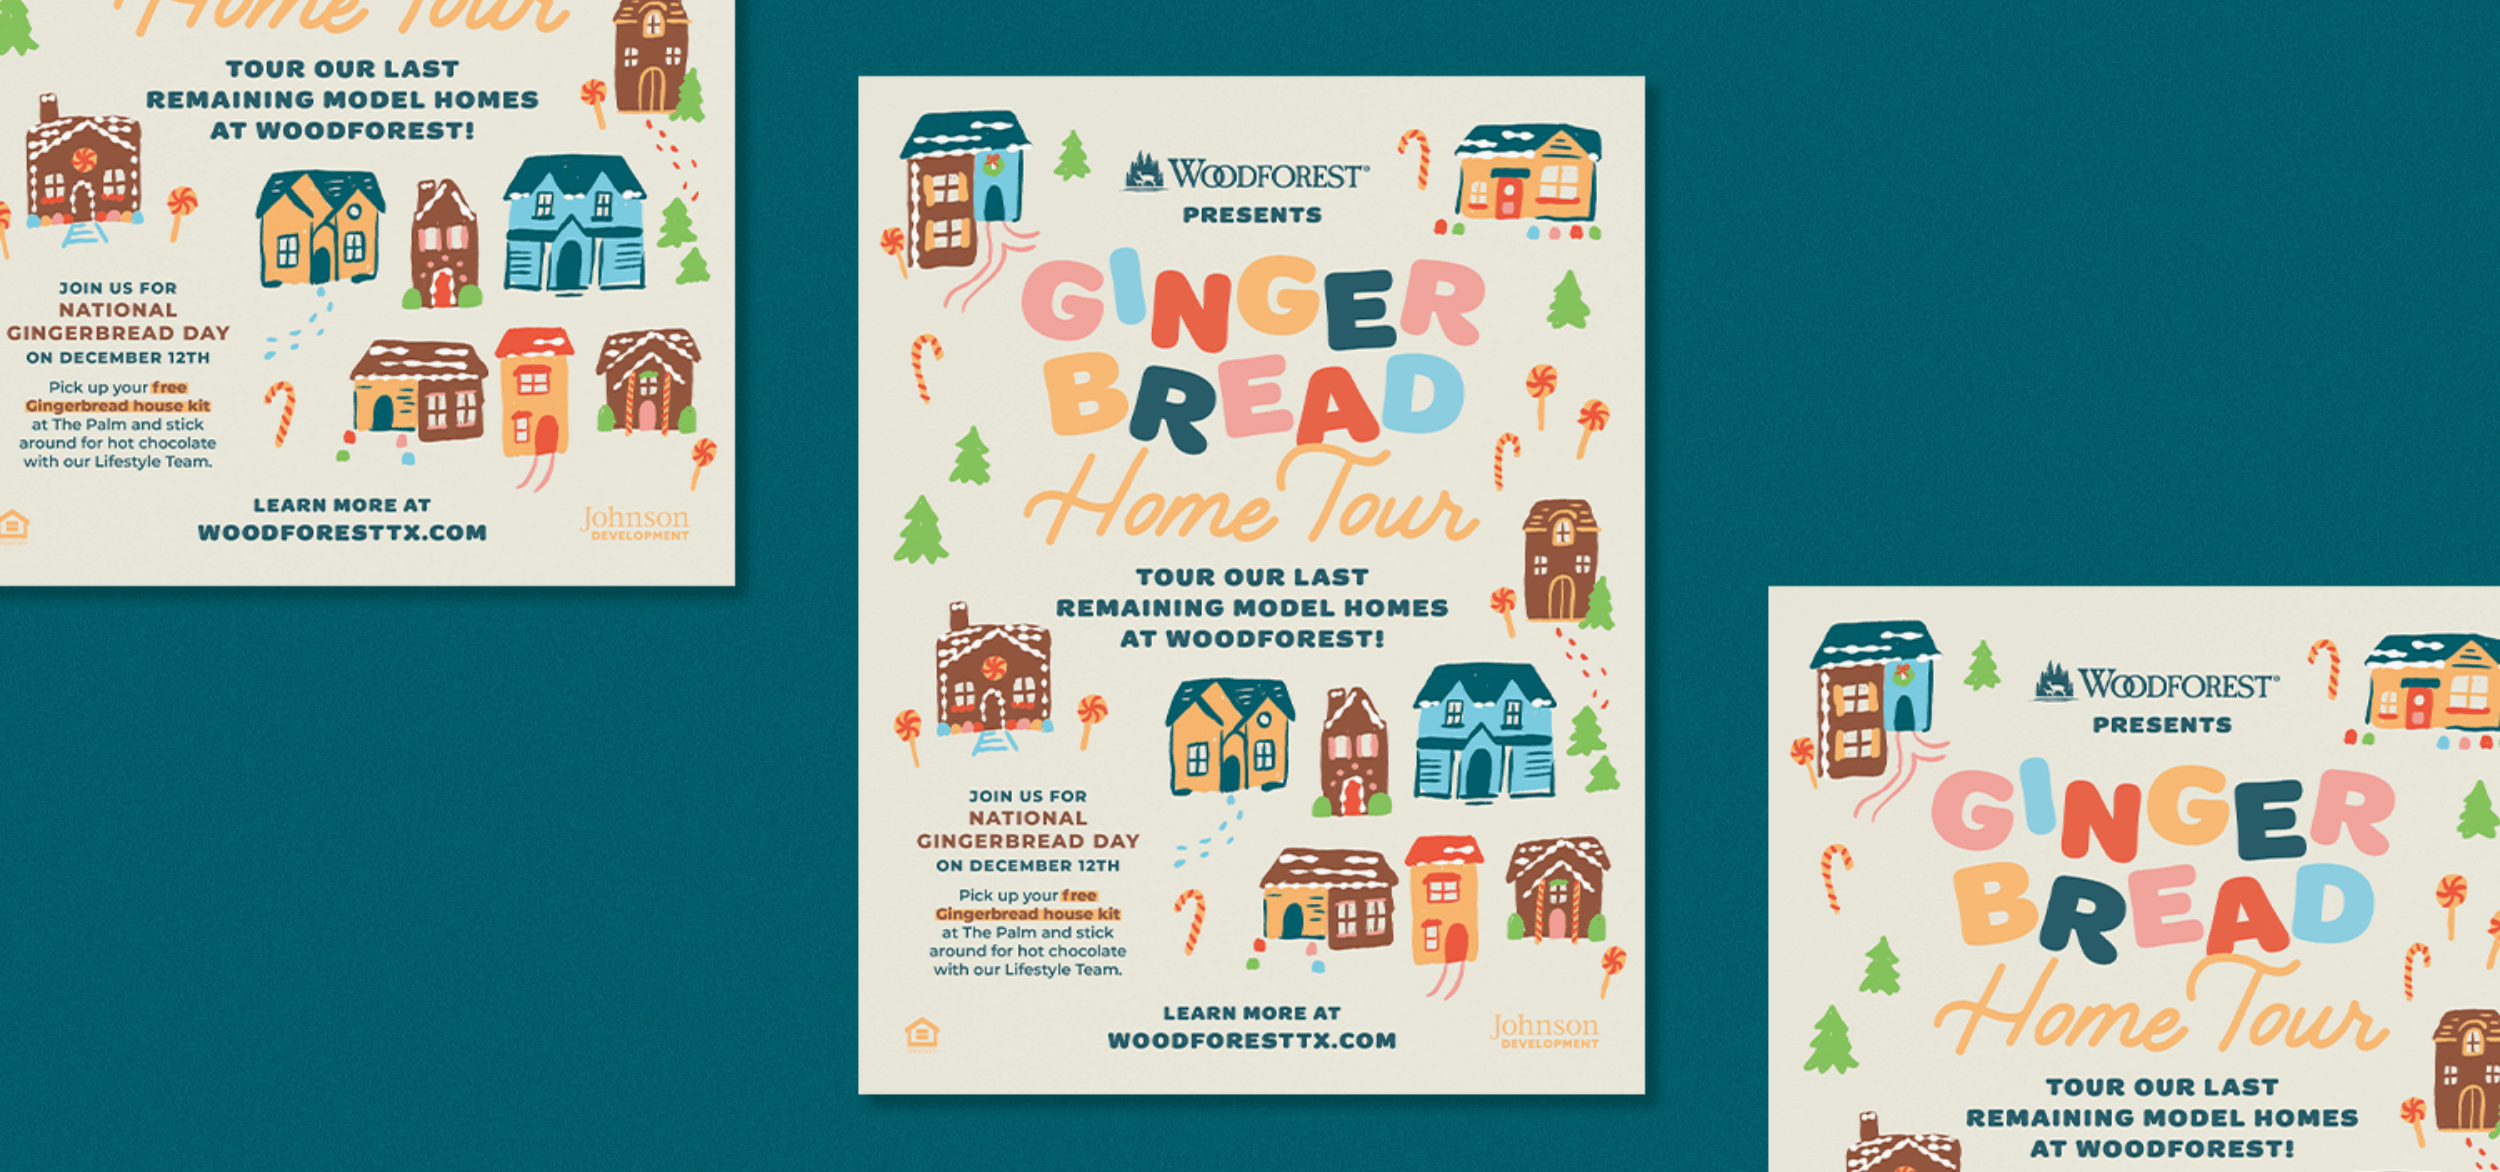 Flyers showing the Gingerbread Home Tour key art created by ST8MNT for a Woodforest Winter campaign